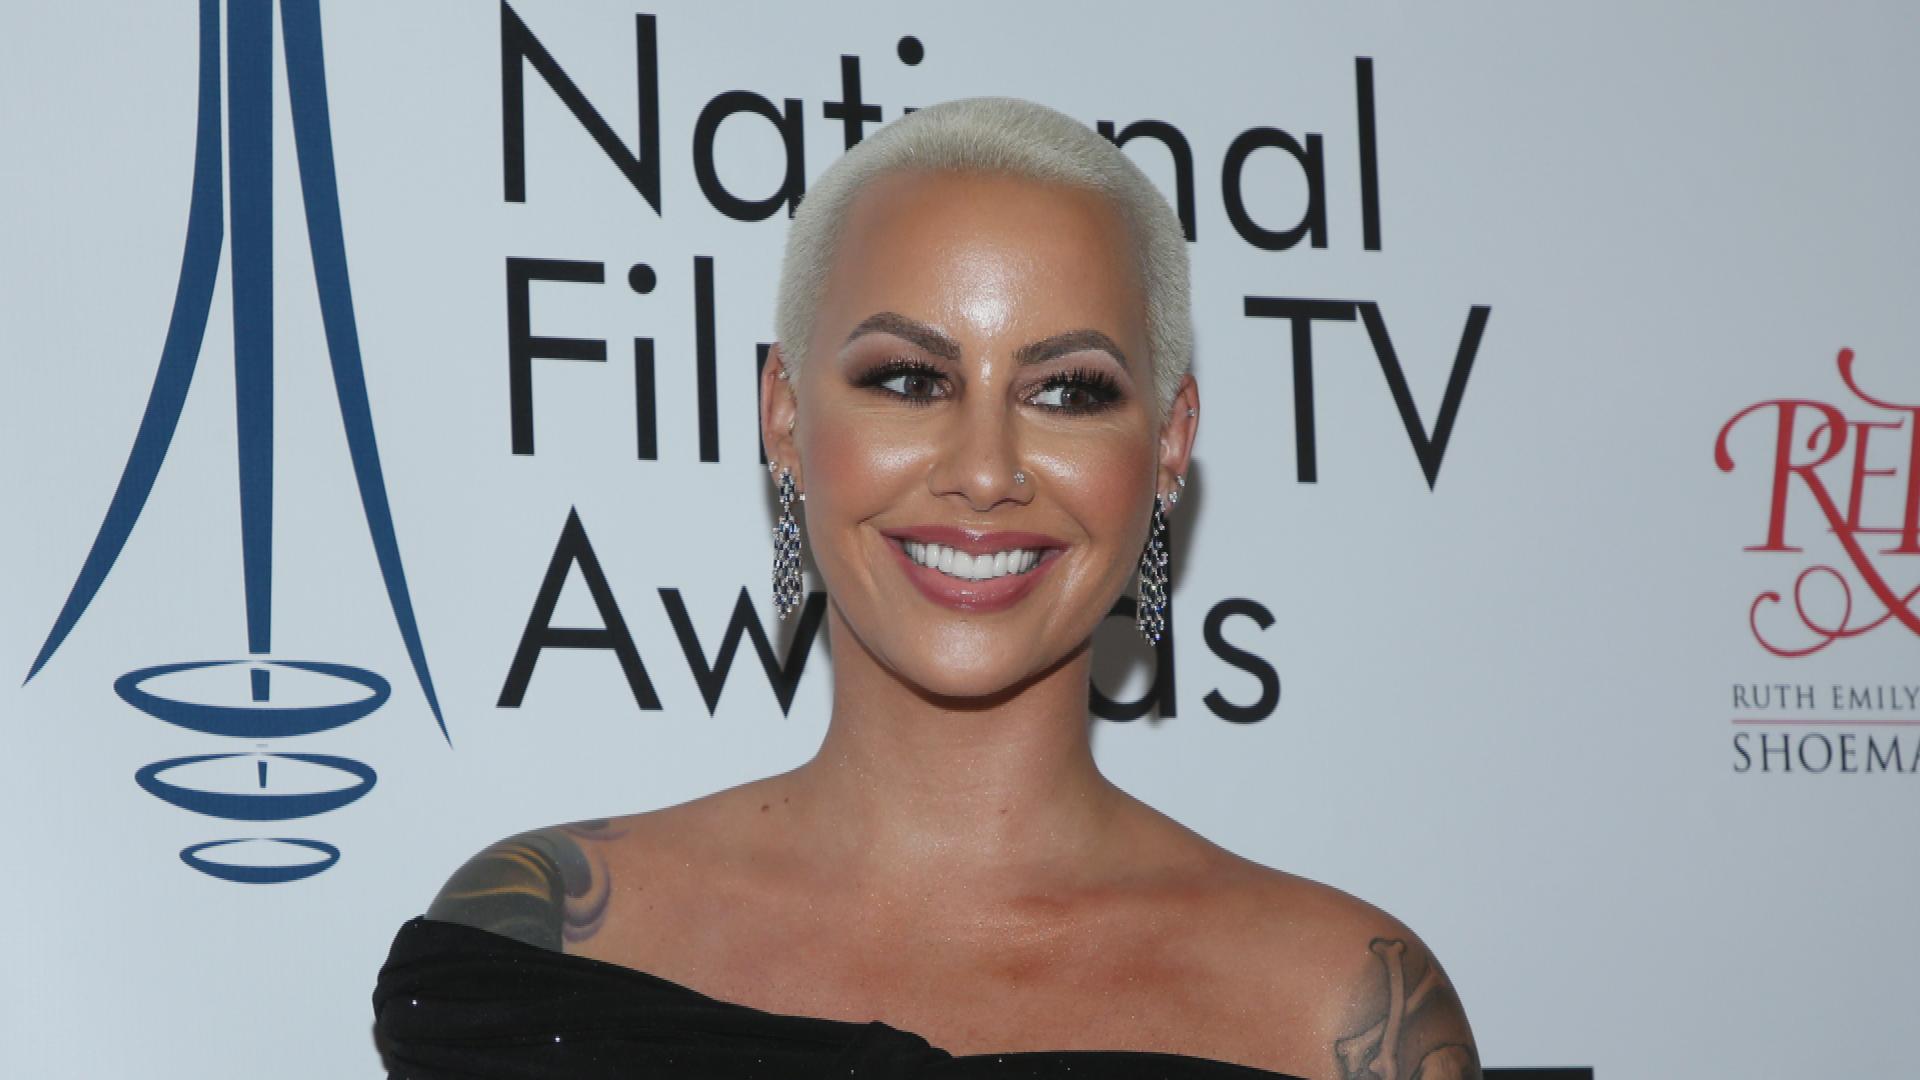 Amber Rose Shows Off Forehead Tattoo  Fans React  Pic  Hollywood Life